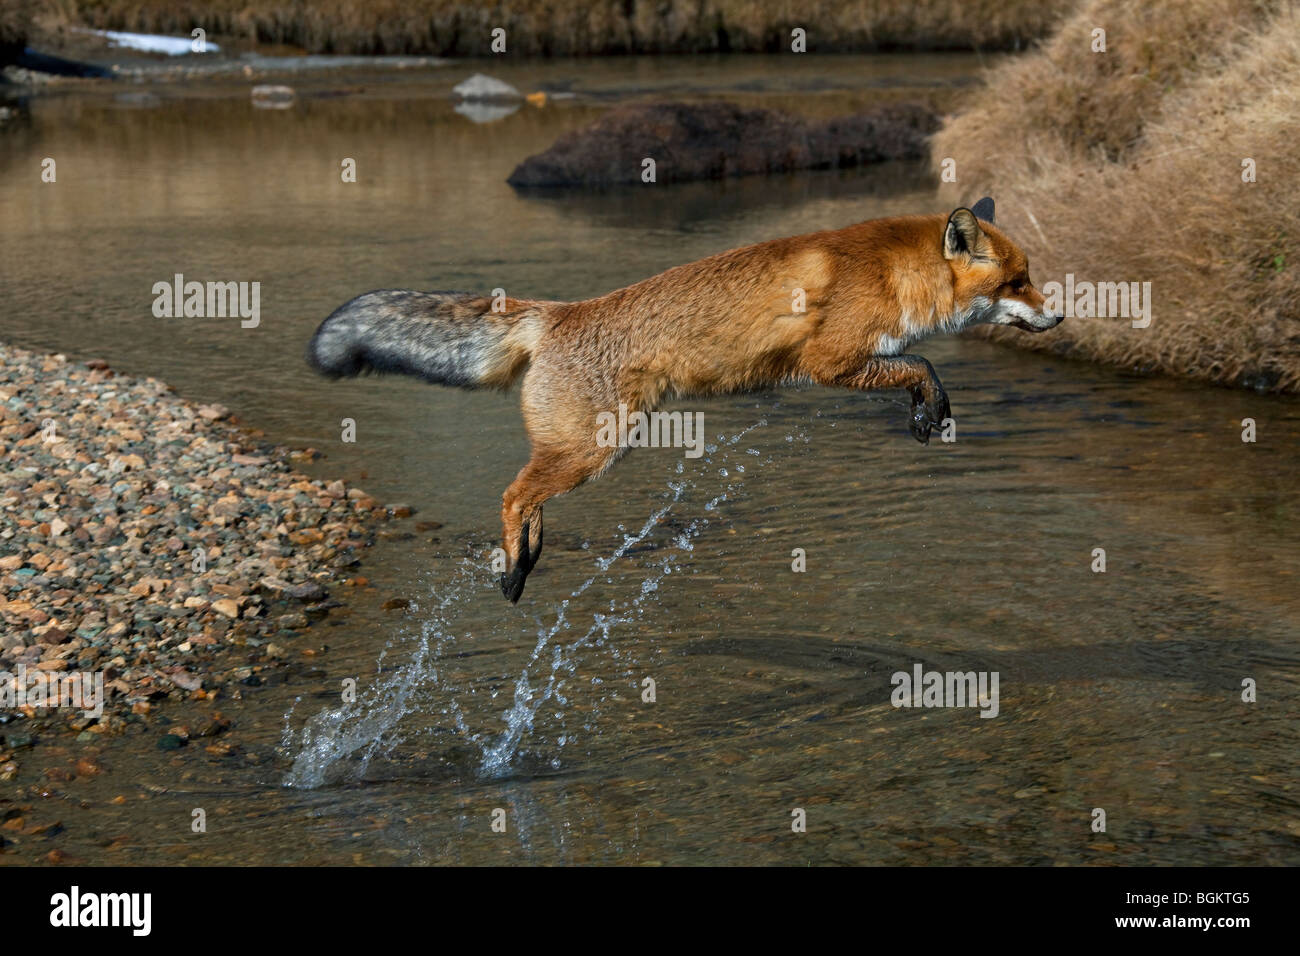 Red fox (Vulpes vulpes) jumping over river Stock Photo